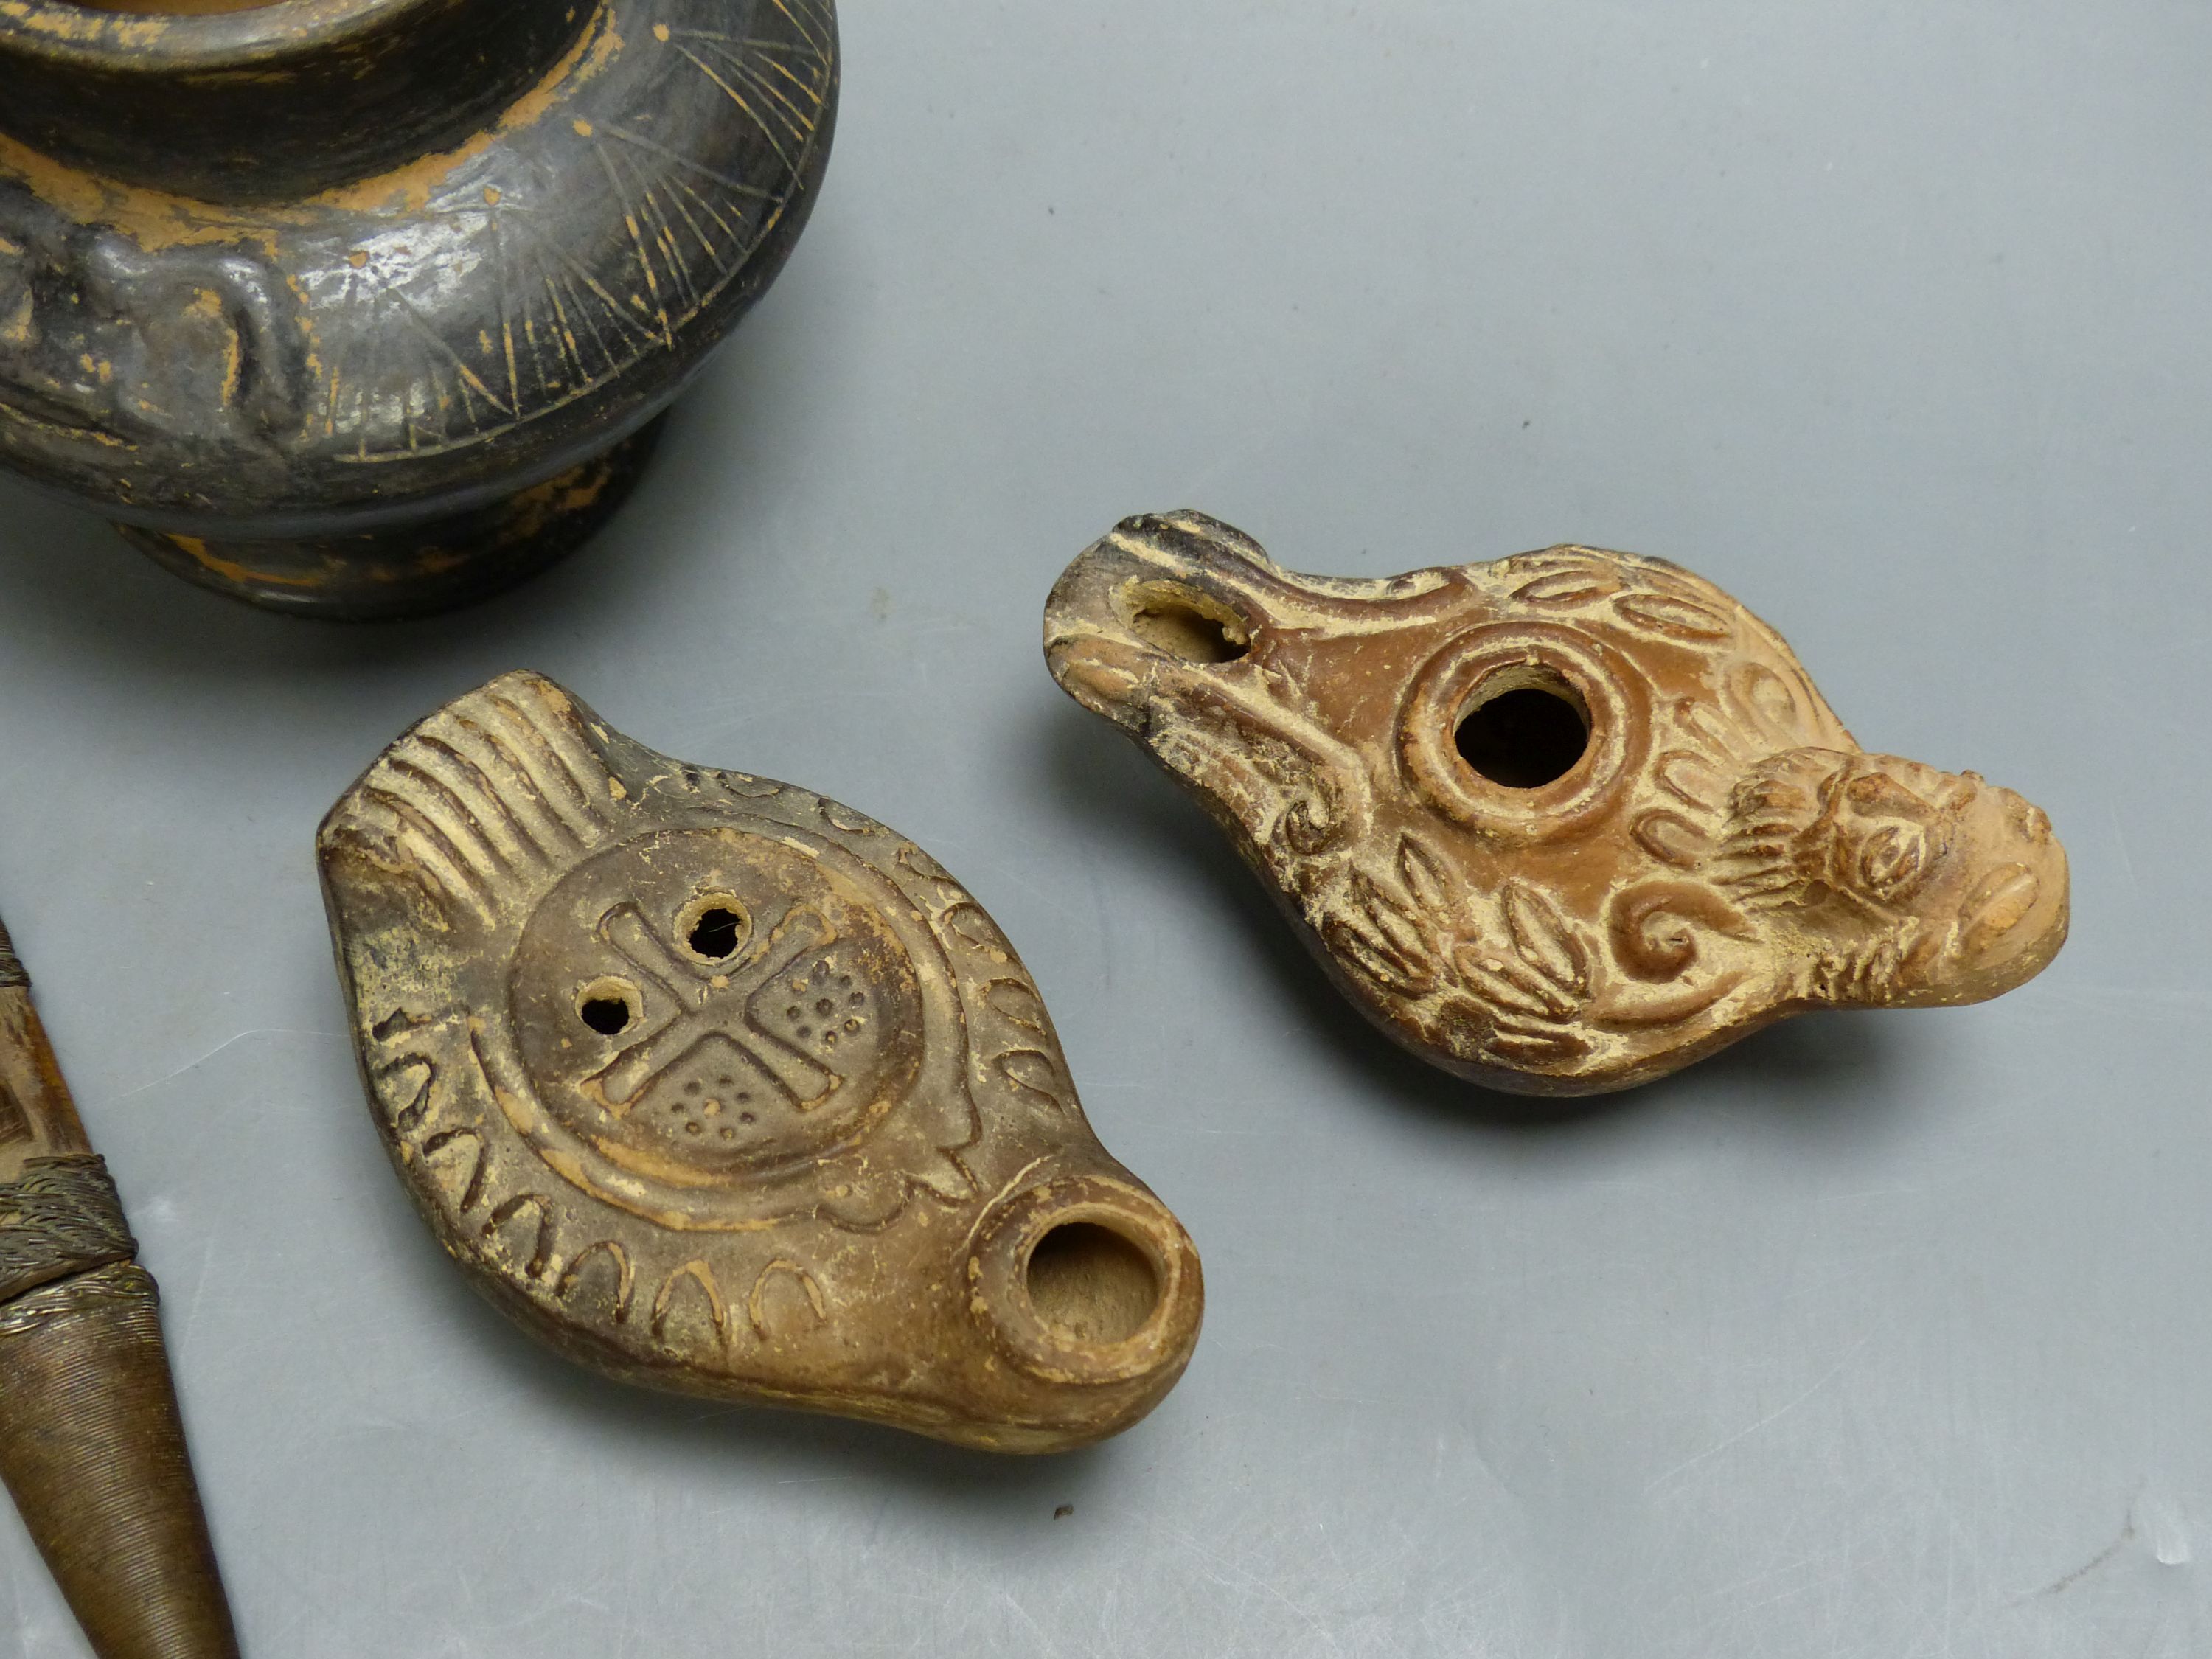 A group of antiquities, three oil lamps, a vase and a figure, etc.